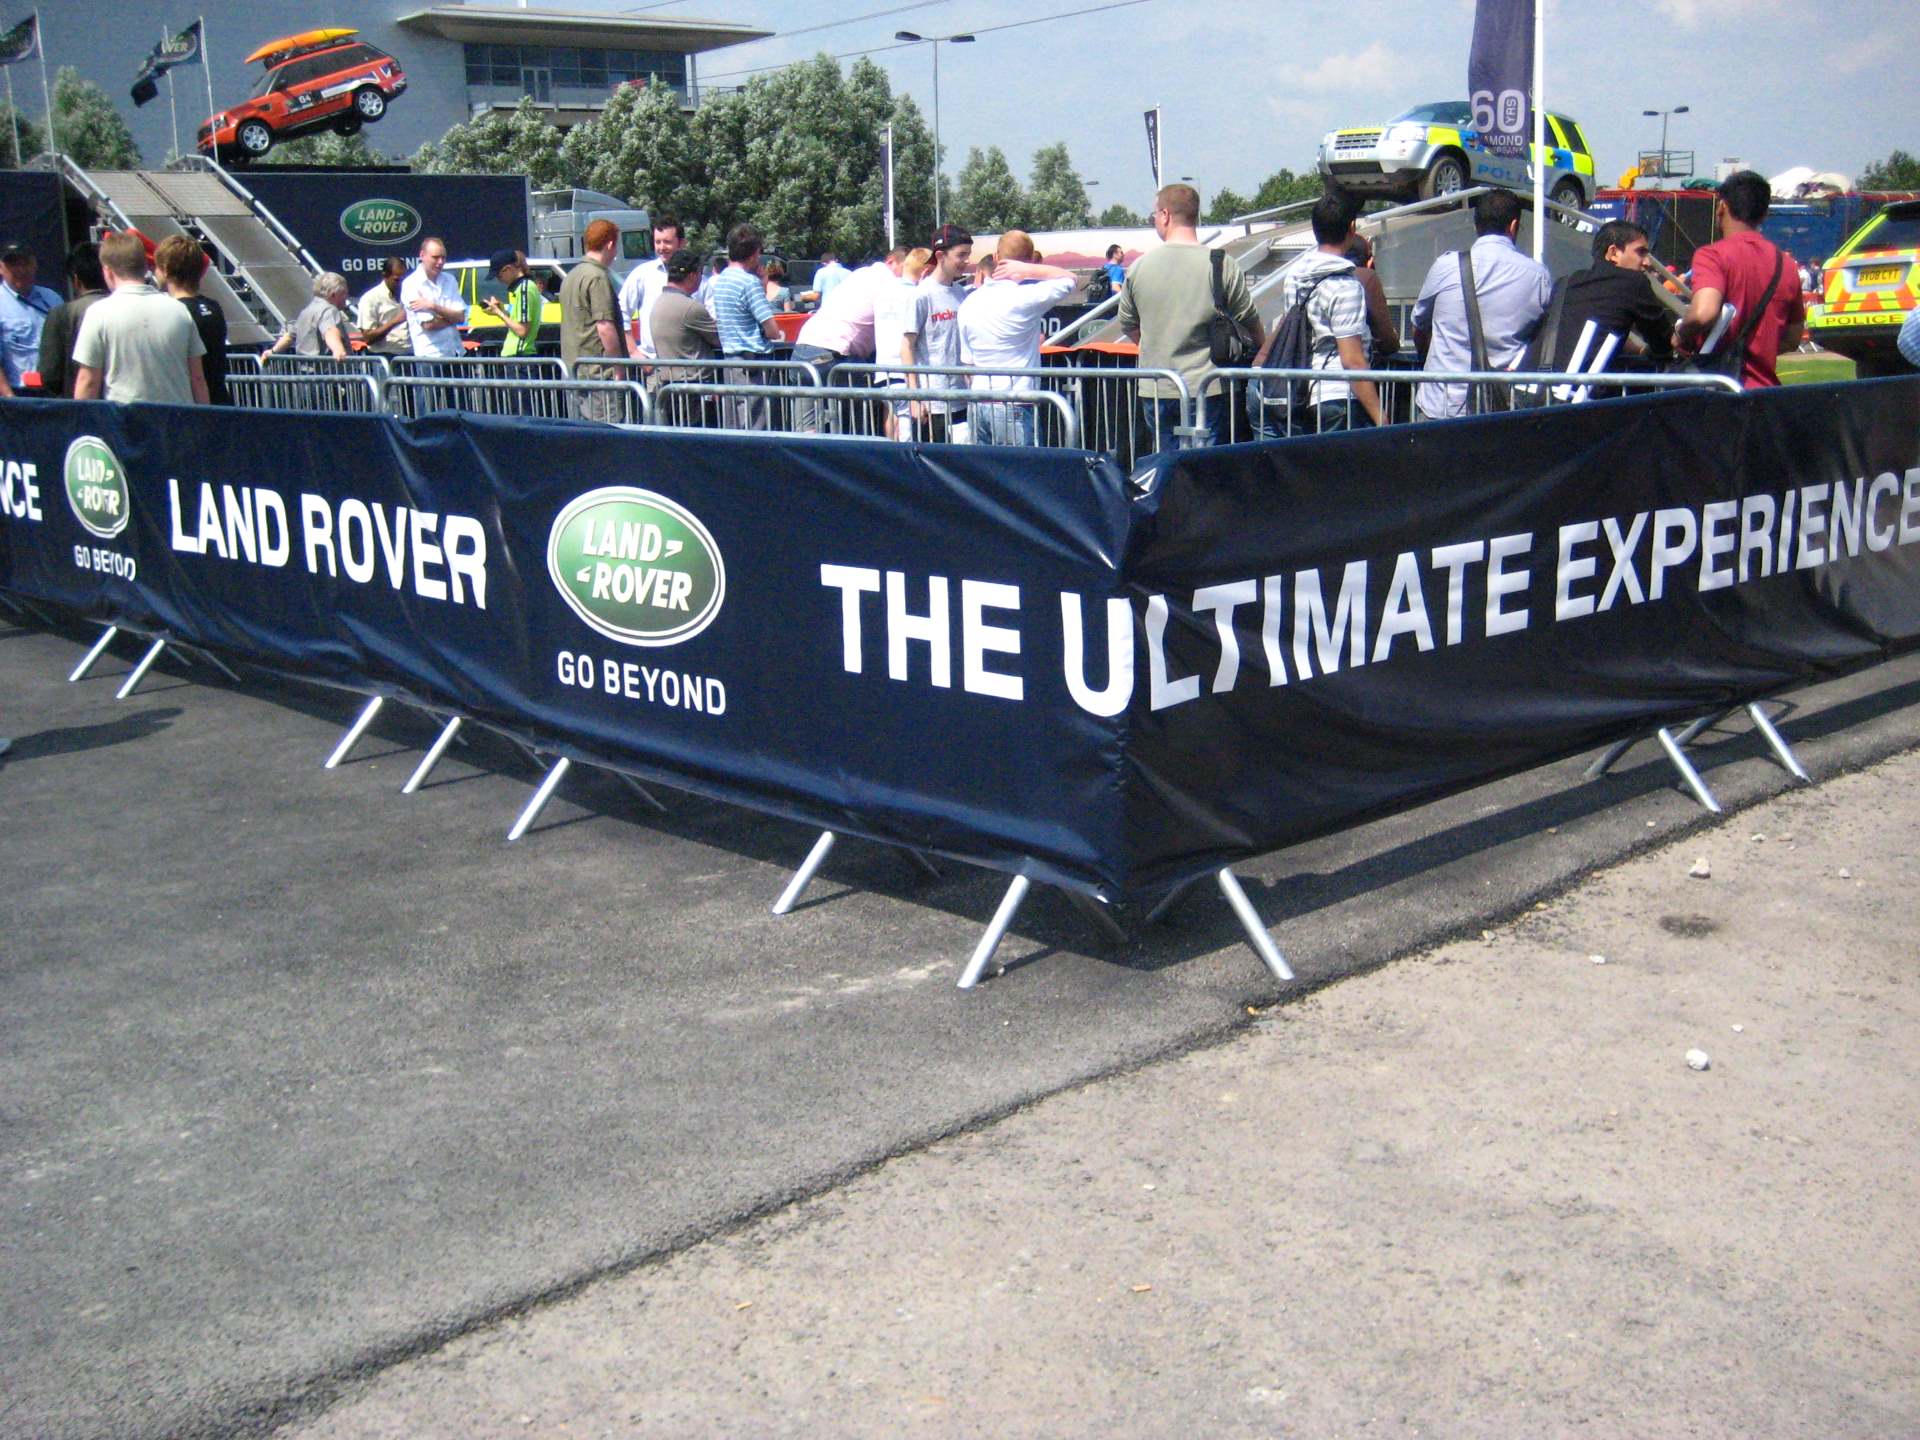 crowd control fencing, our bespoke fencing covers can increase your brand's exposure at multiple events.